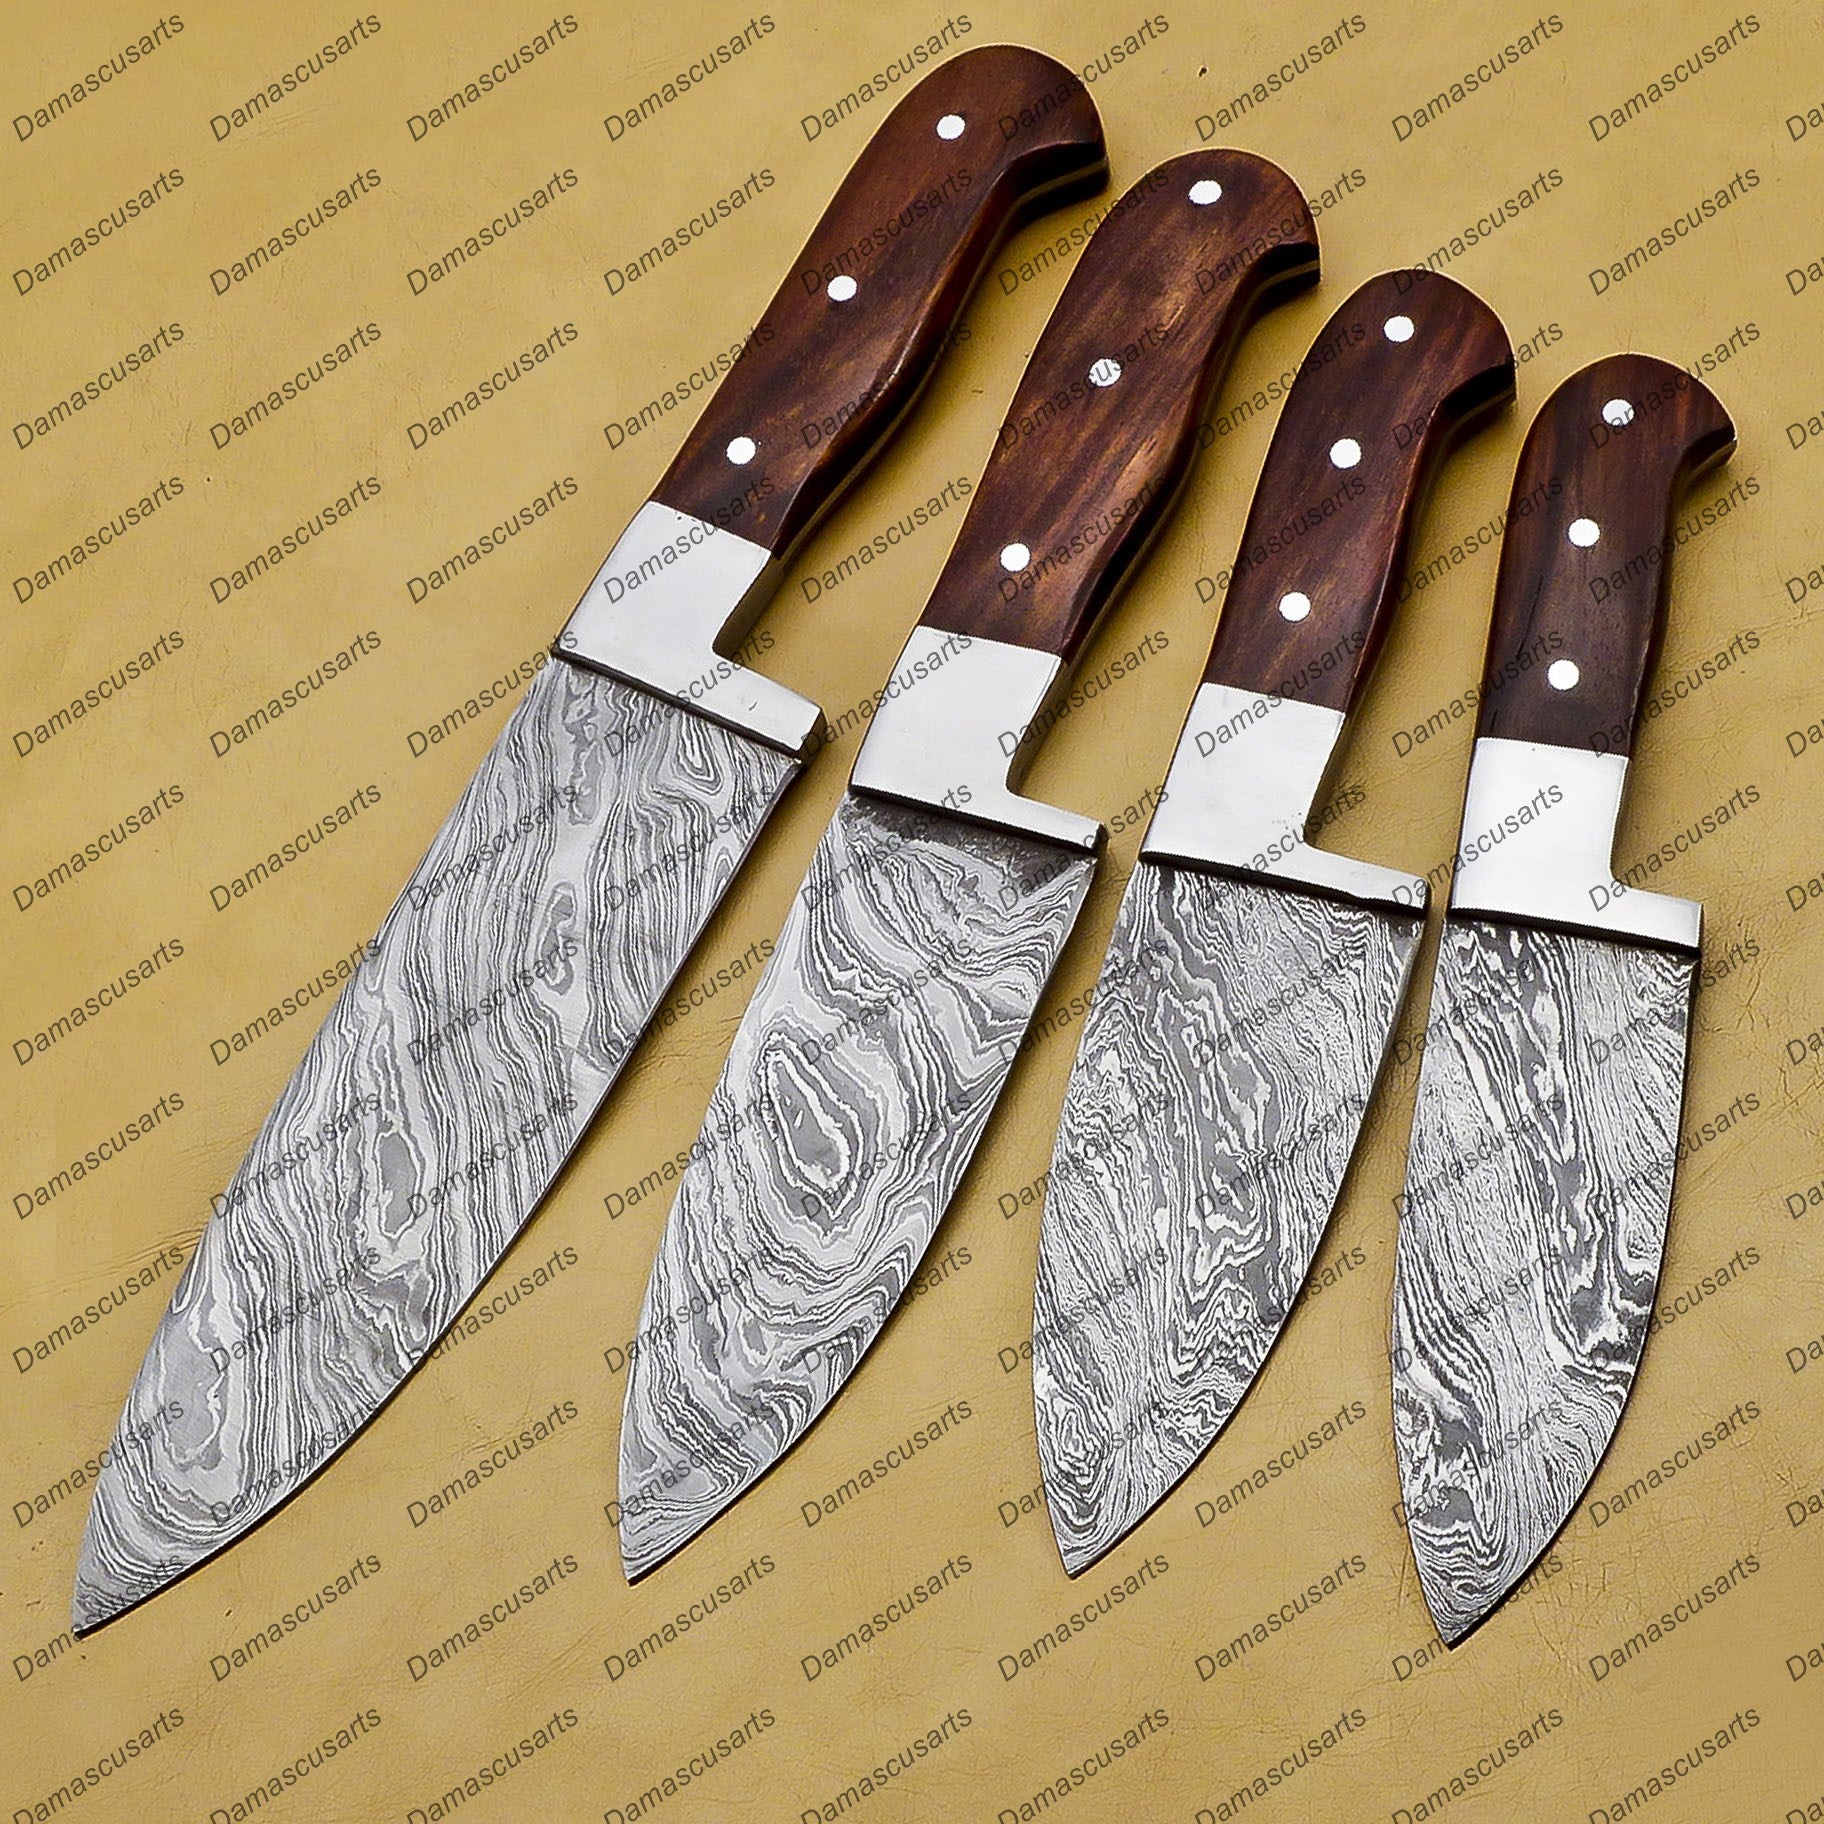 Damascus Chef Knife Set Best Gift Vintage Knife Forged Steel Knife Perfect Gift Handcrafted Kitchen Assortment Handle made with Koa Wood